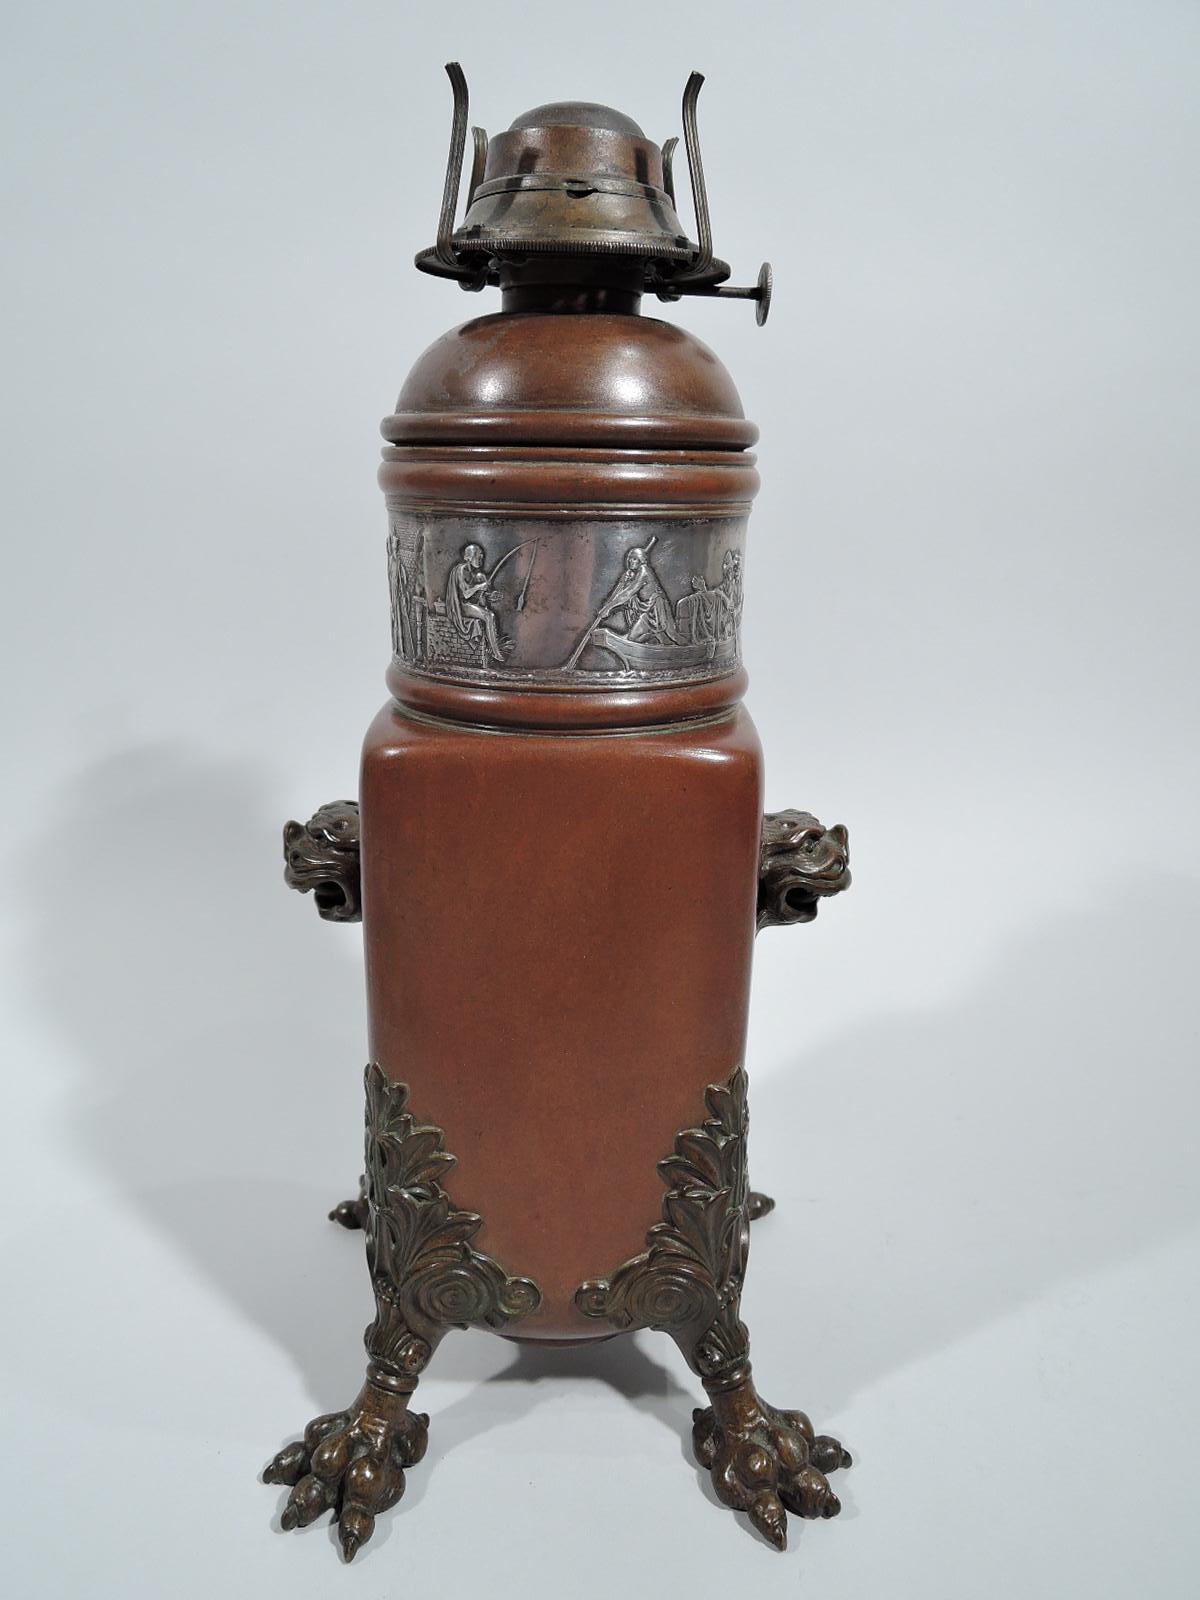 Japonesque mixed metal lamp base. Made by Gorham in Providence in 1882. Rectilinear copper body with bronze foo dog heads mounted to sides, and leaf-and-scroll corner mounts with bulgy talon supports. Domed inset top with low relief silver frieze